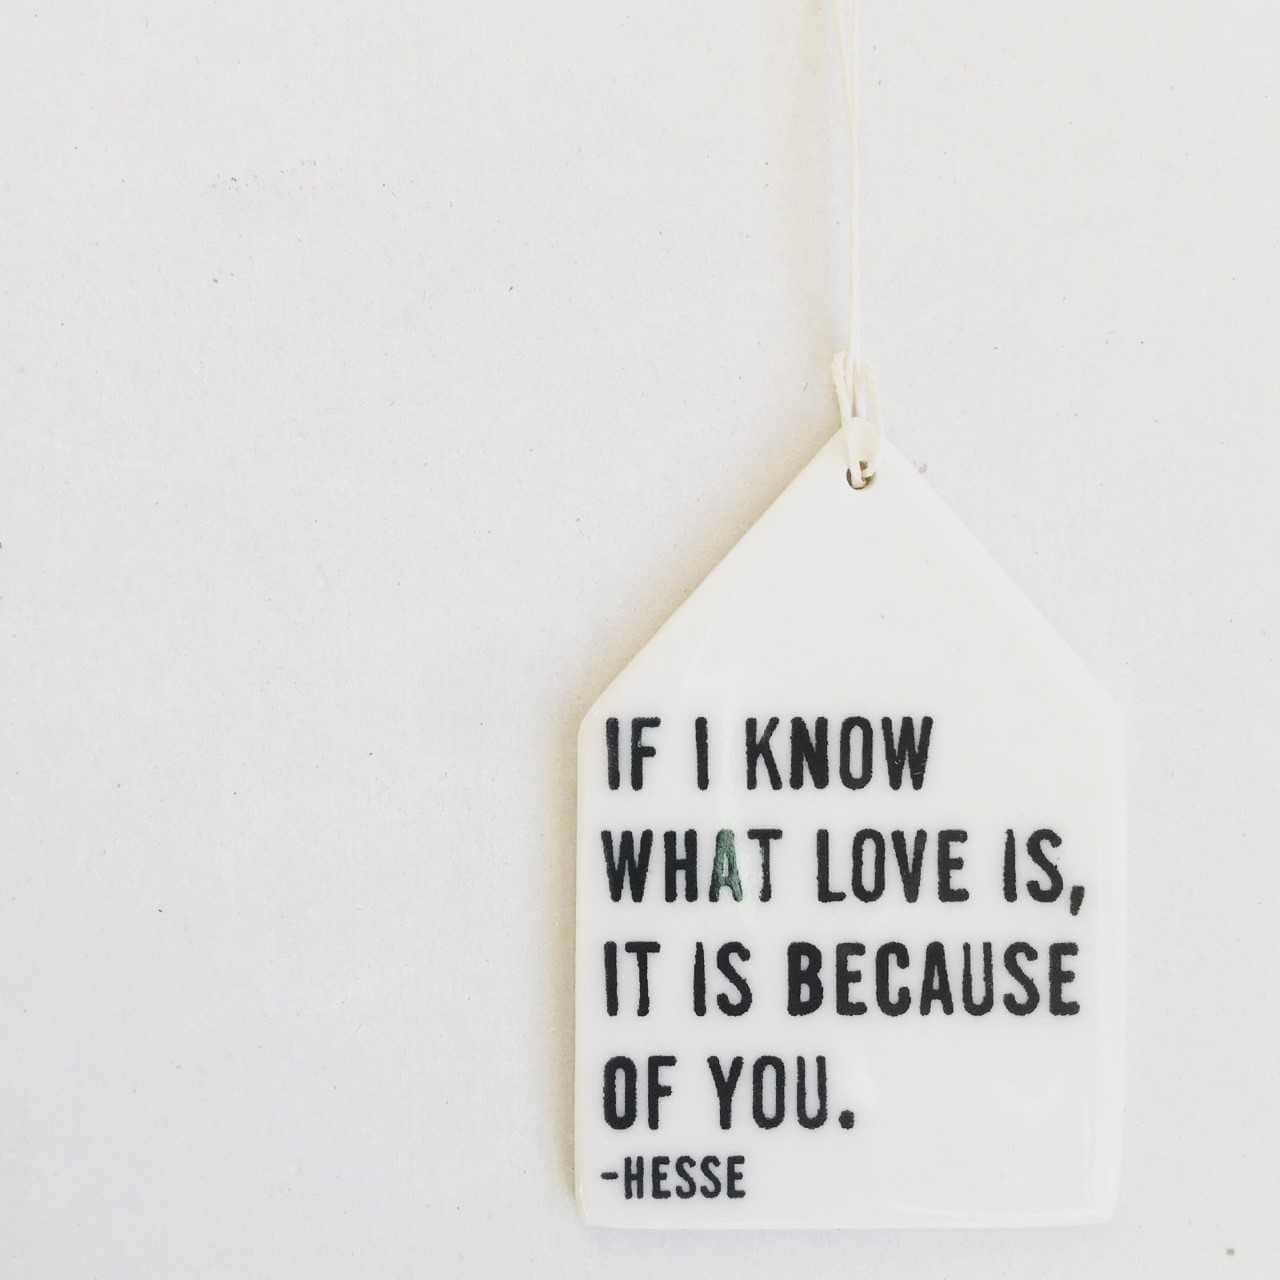 hermann hesse quote | hesse quote | ceramic wall tag | screenprinted ceramics | meaningful gift | love quote | handmade gift